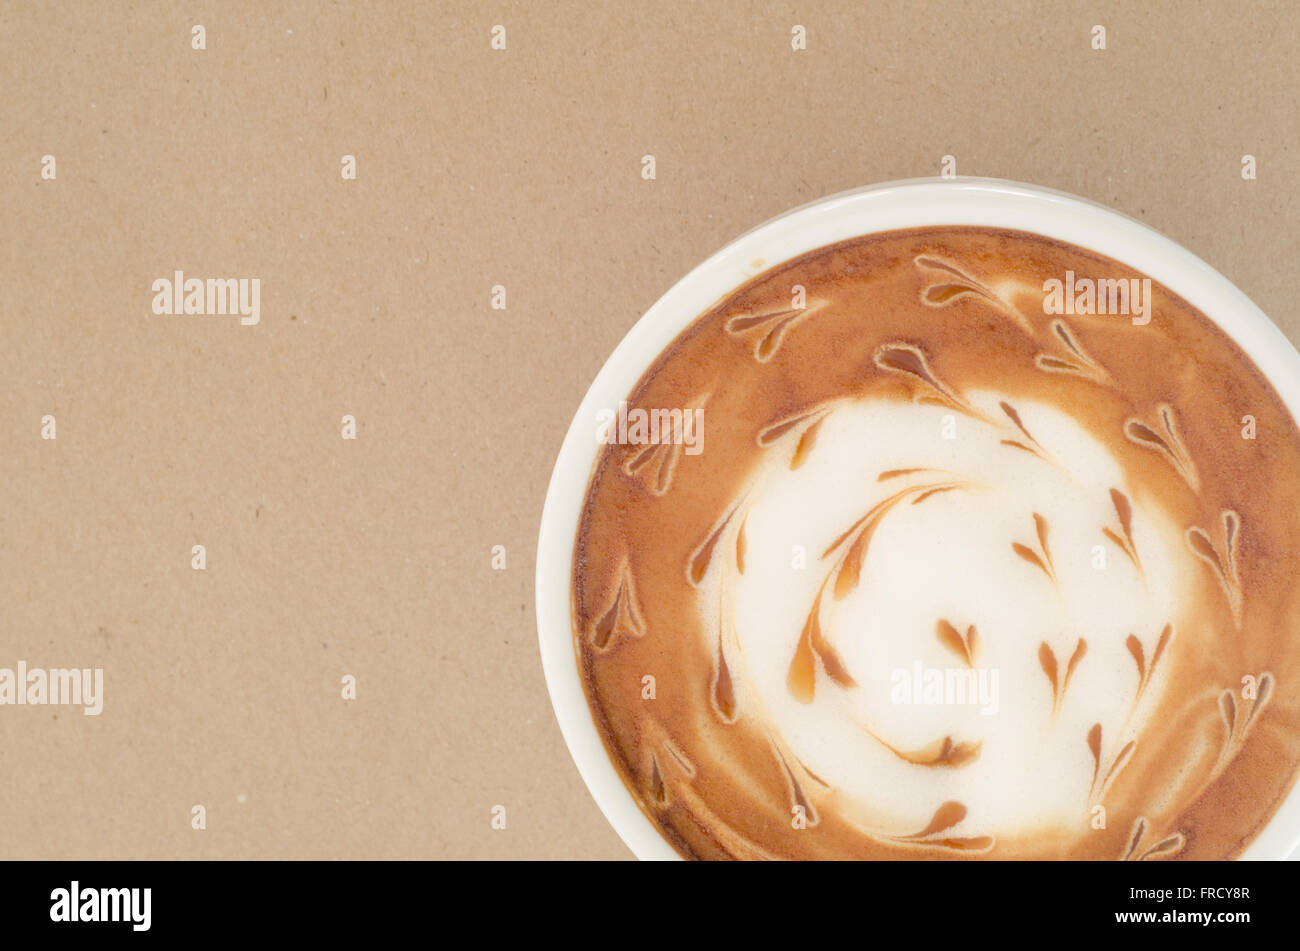 a cup of latte art on brown paper background Stock Photo